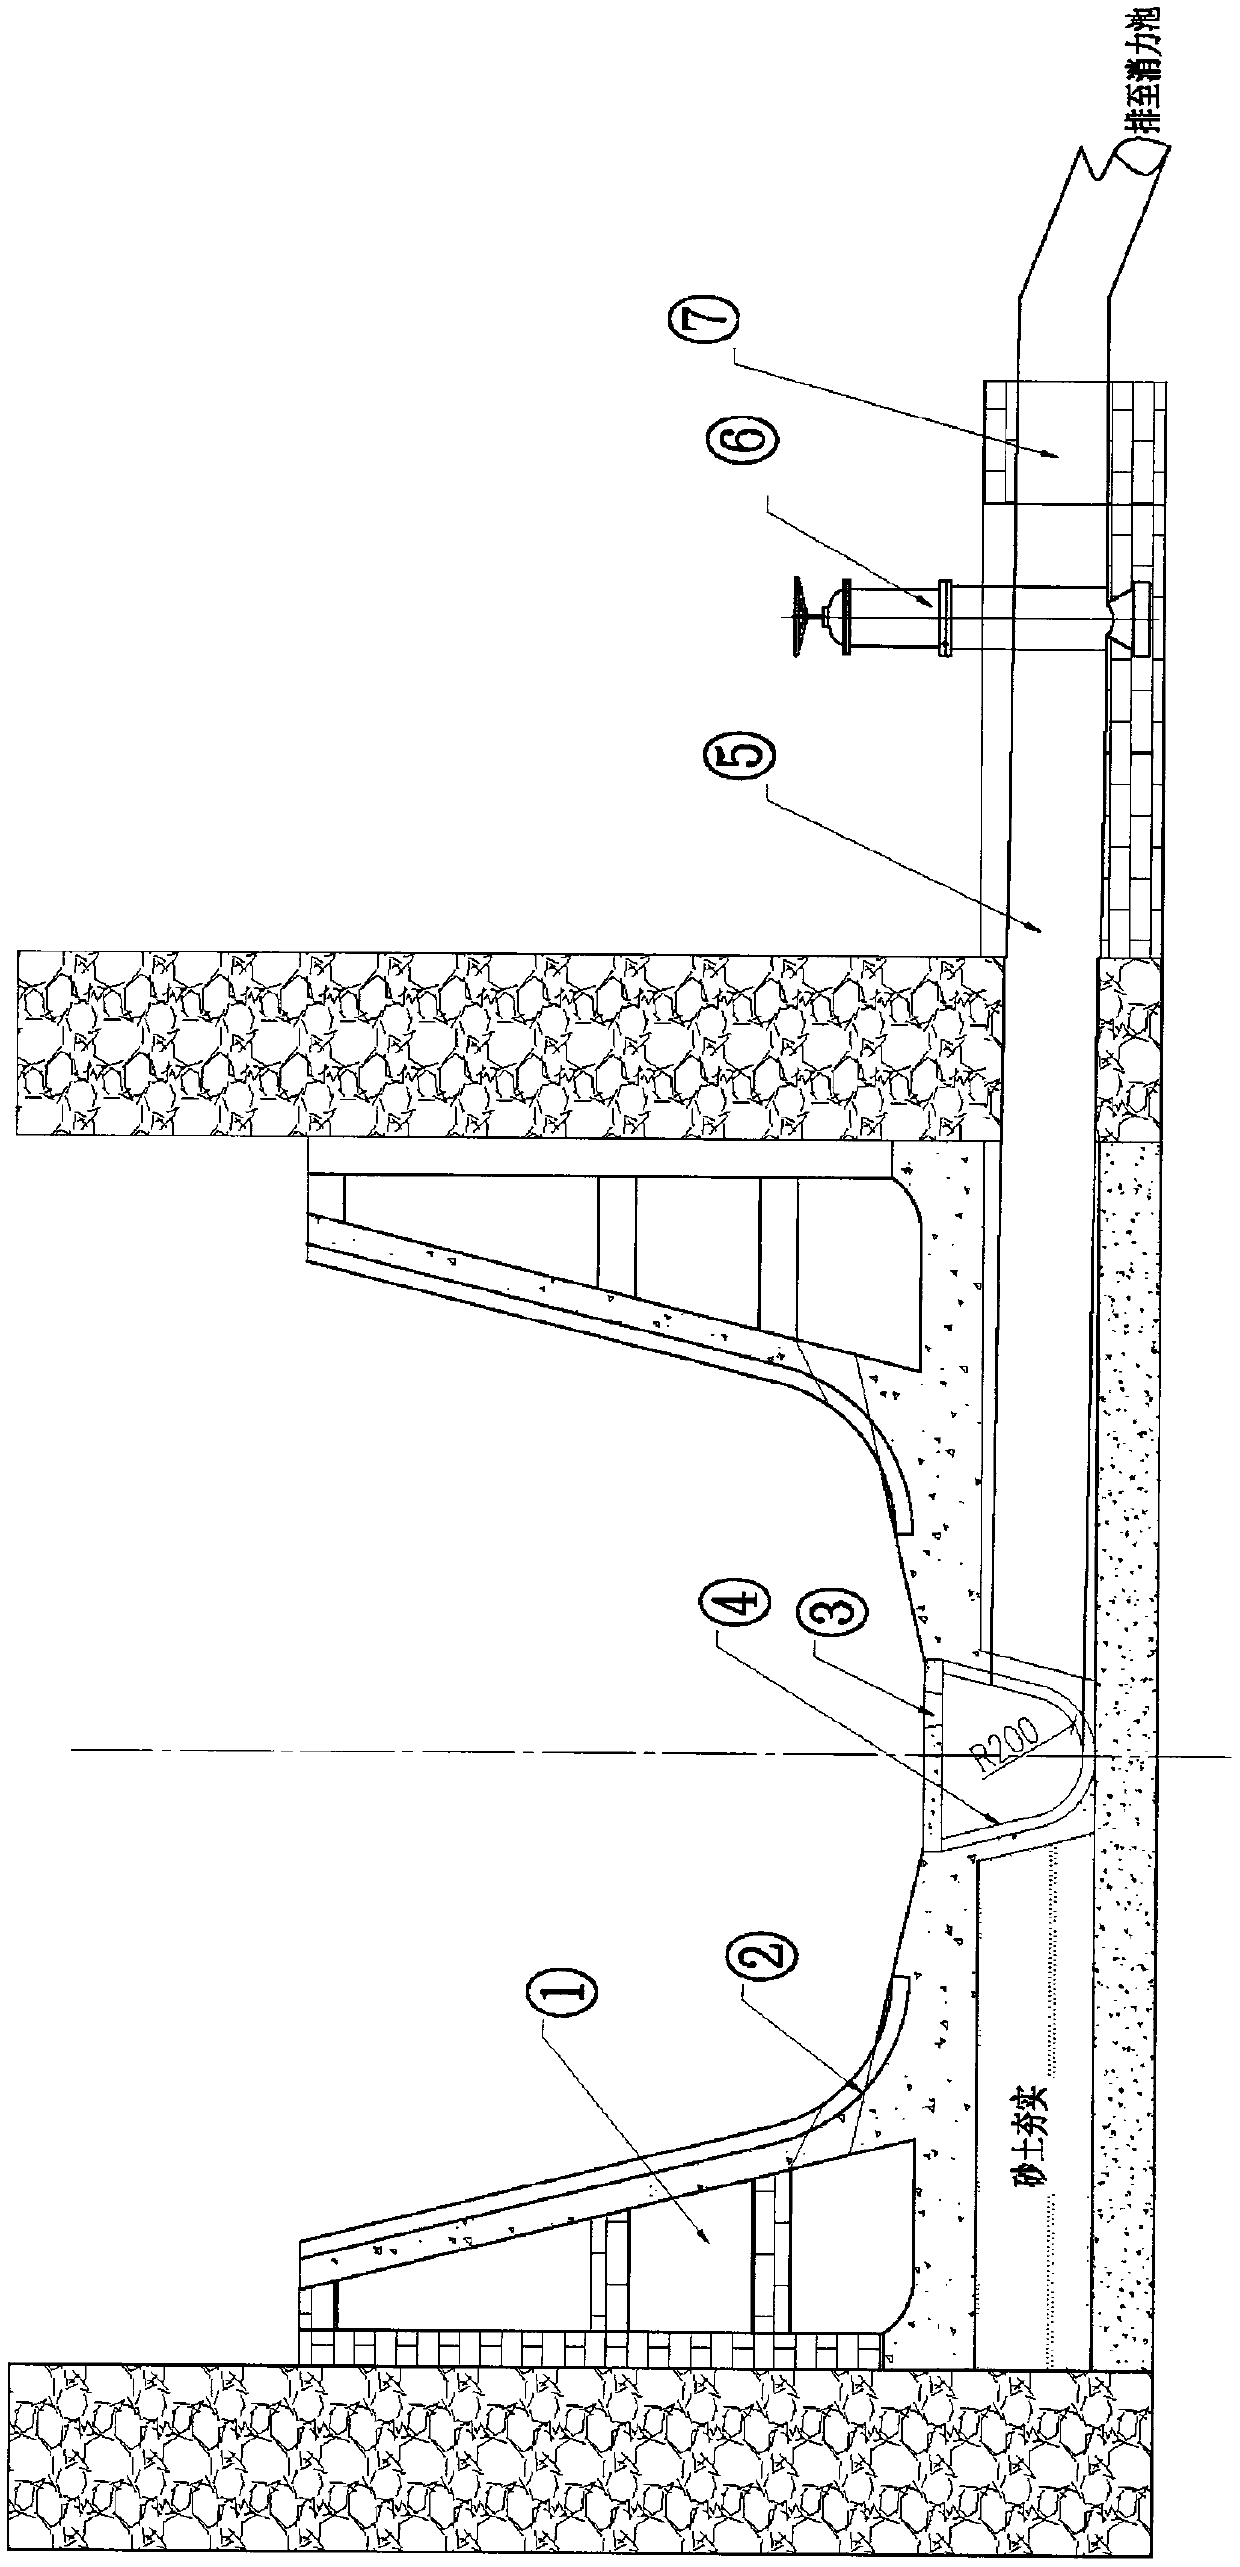 Hydrodynamic linkage scouring and desilting facility